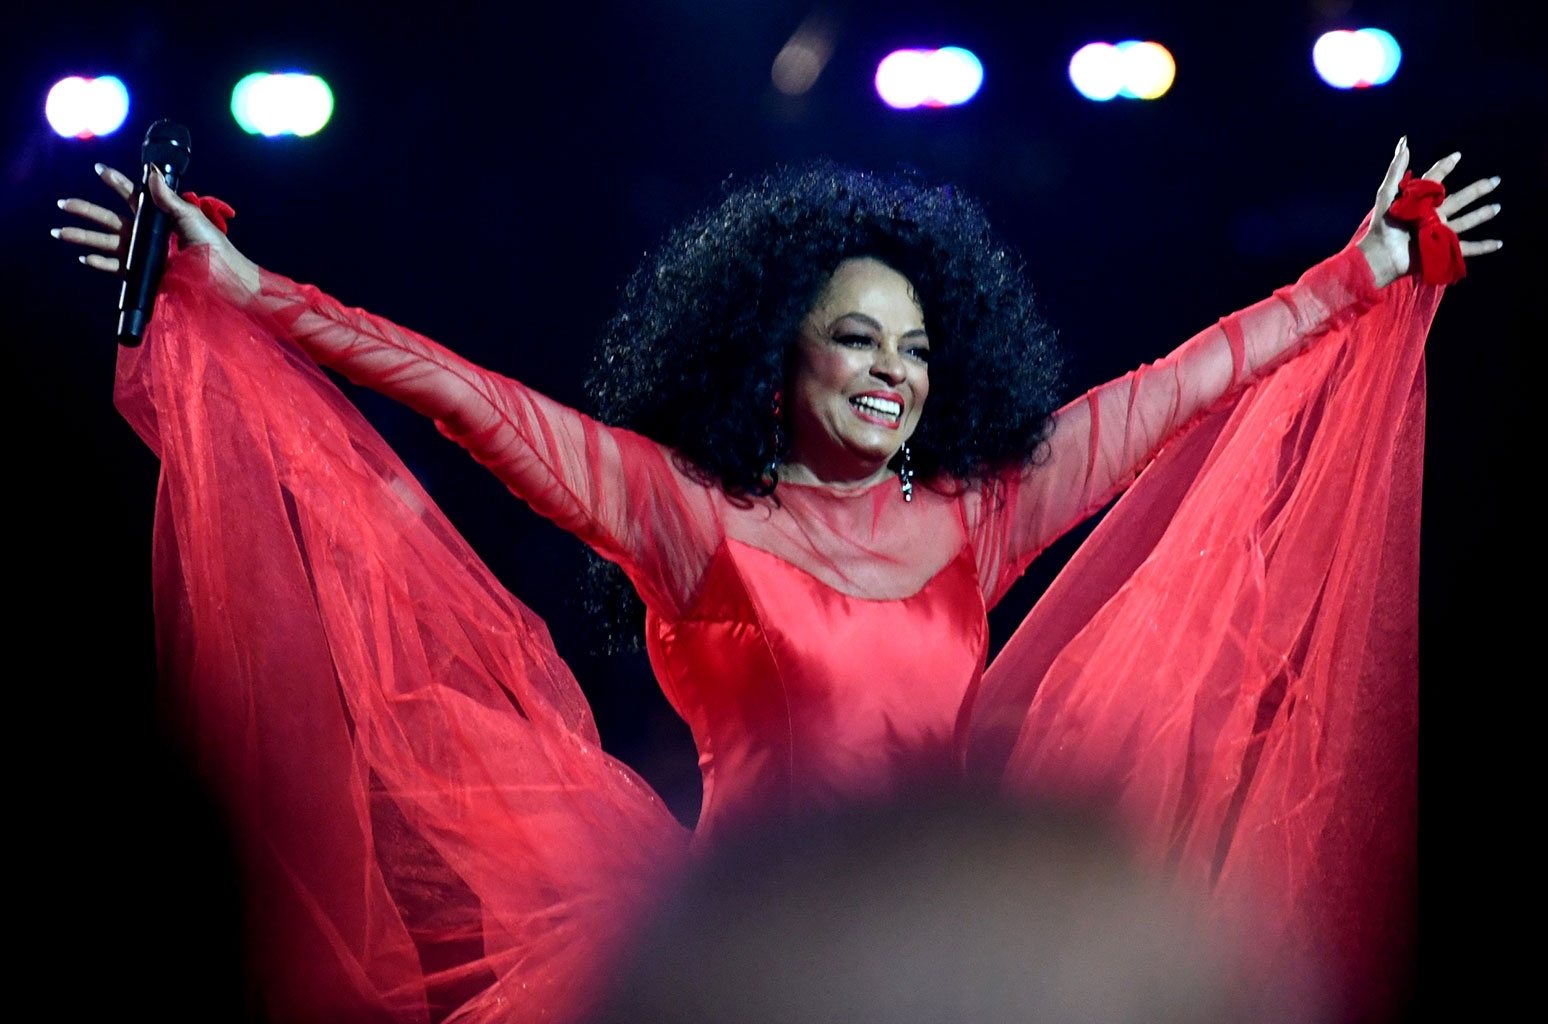 Diana Ross Talks Meeting With Mark Ronson Ahead of Her Next Album